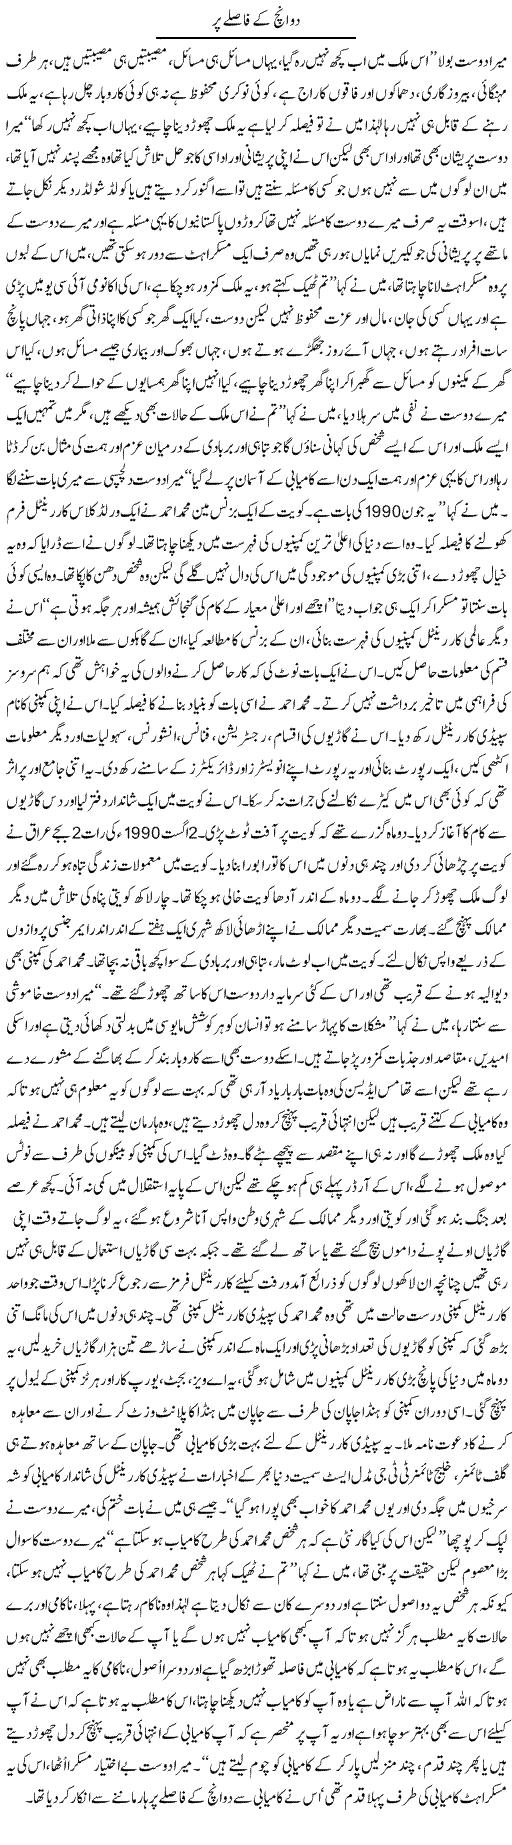 Way of 2 Inches Express Column Amad Chaudhry 7 November 2010